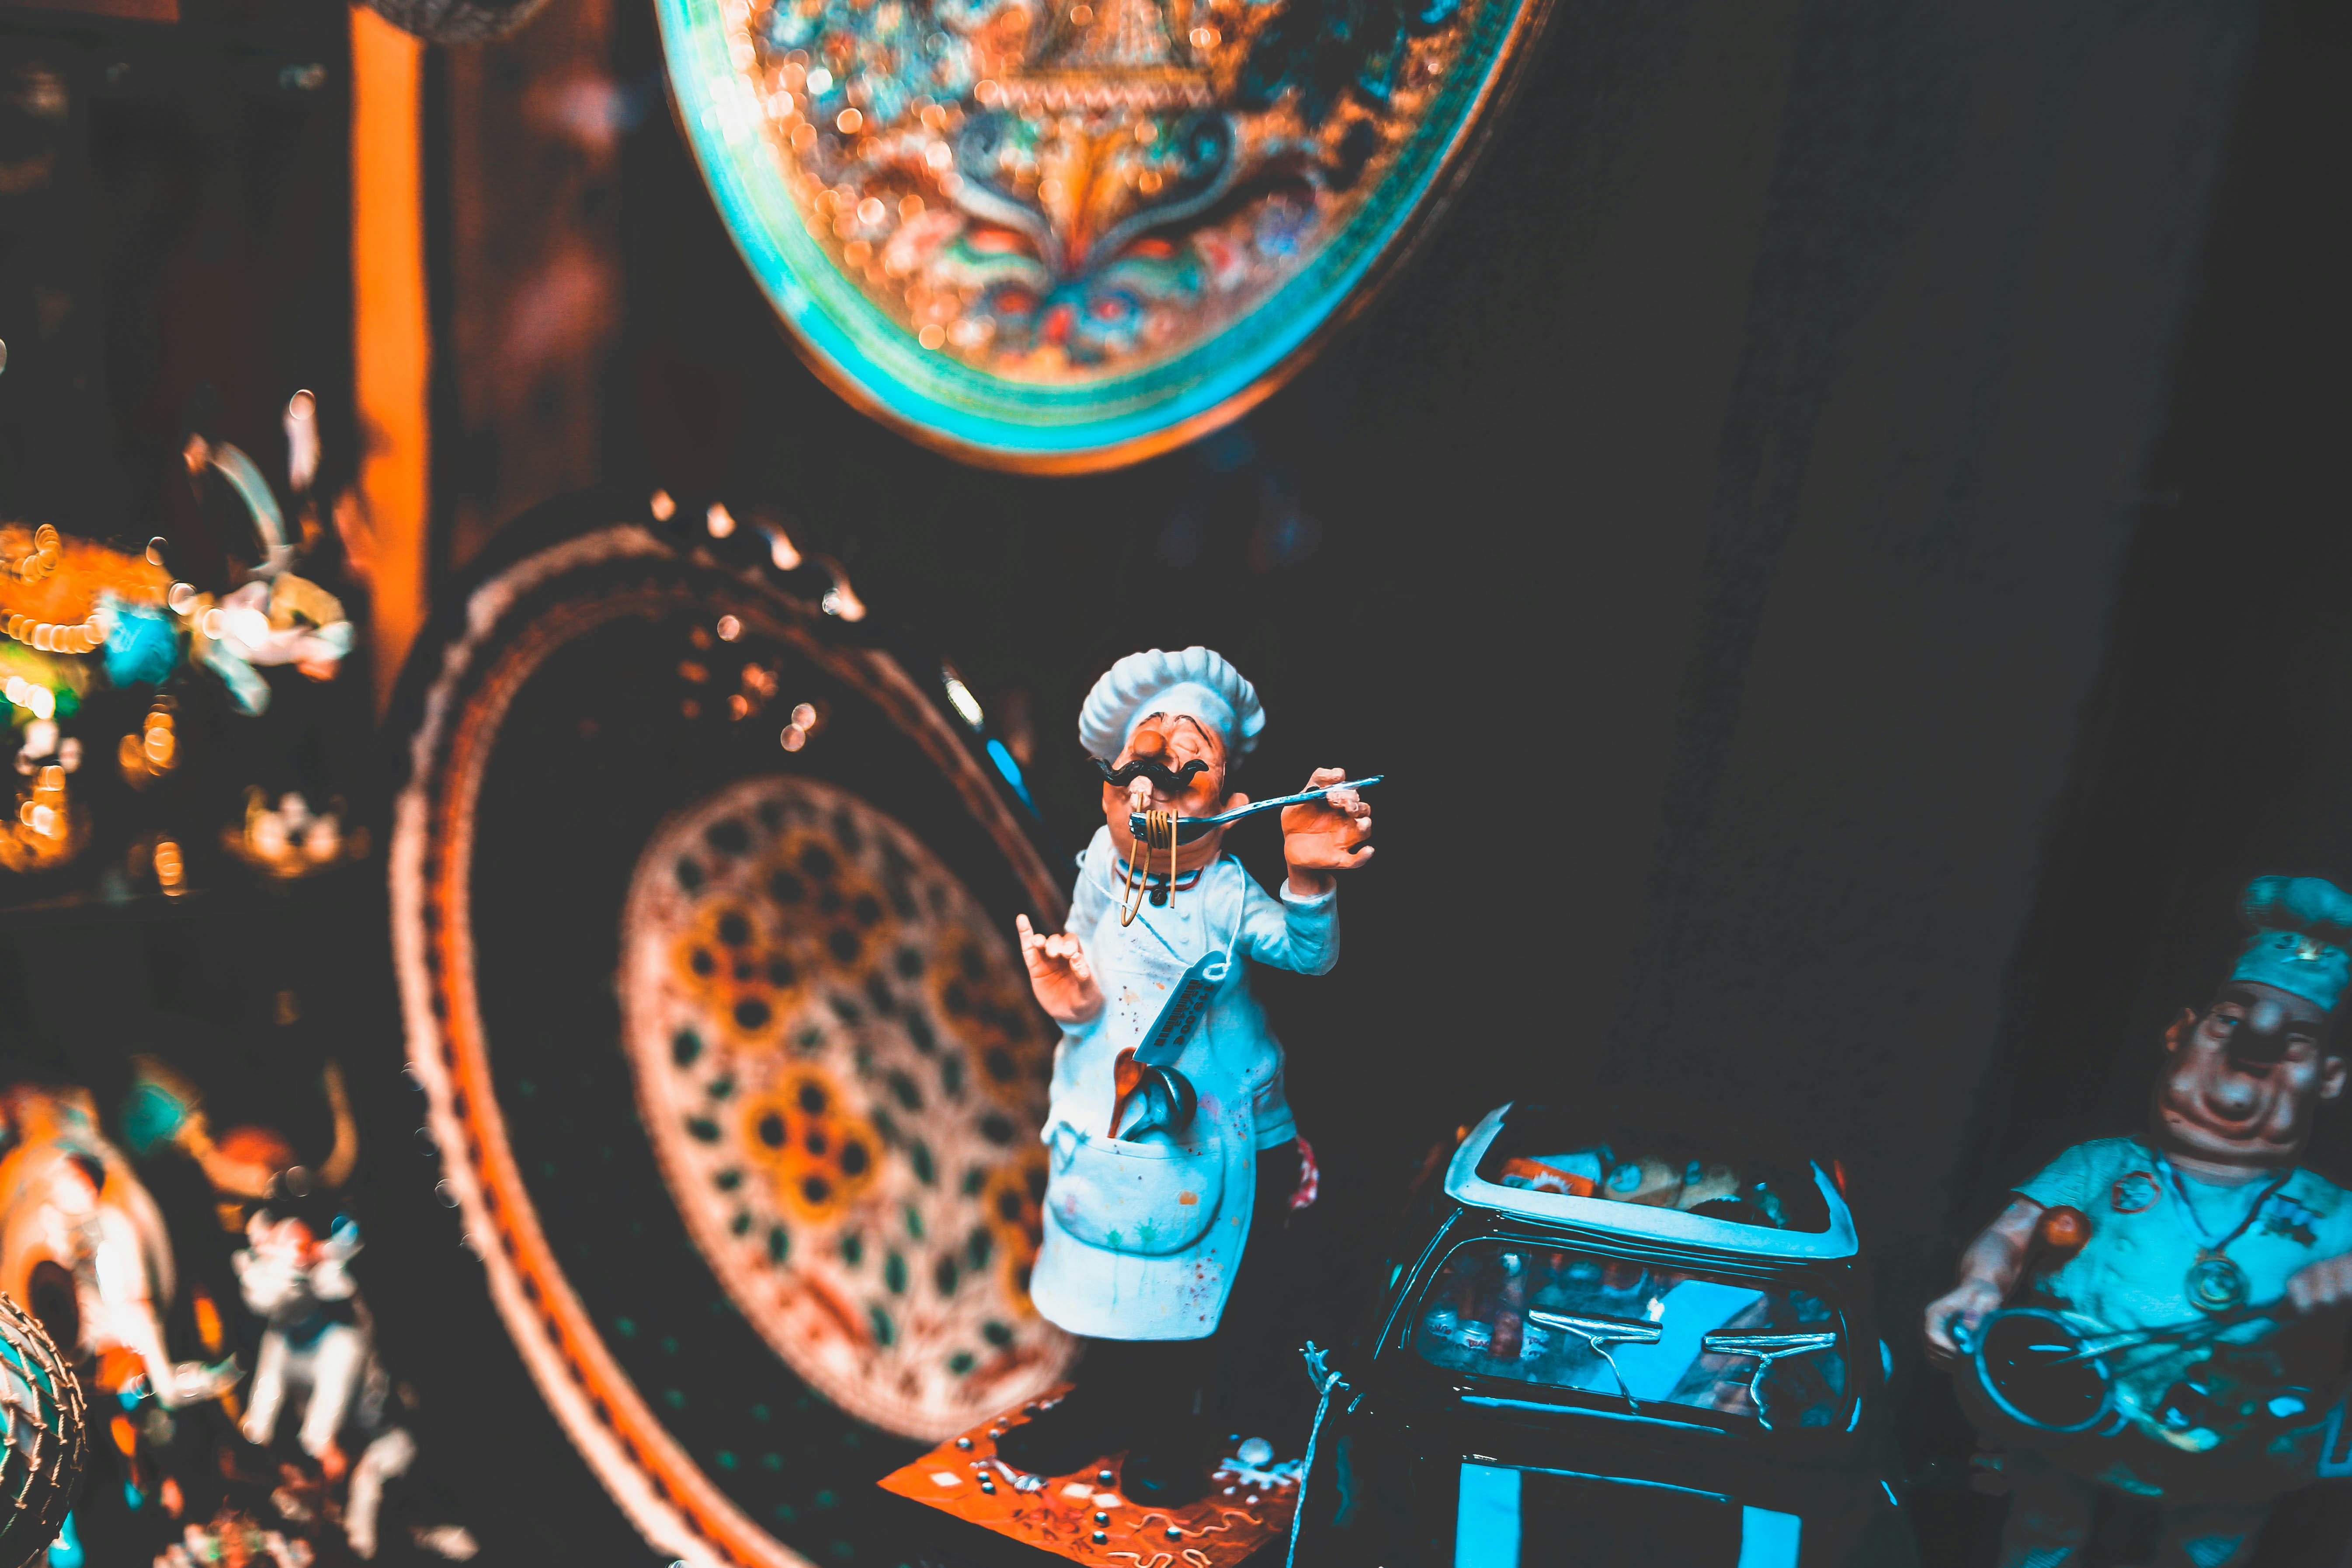 shallow focus photography of chef figurine